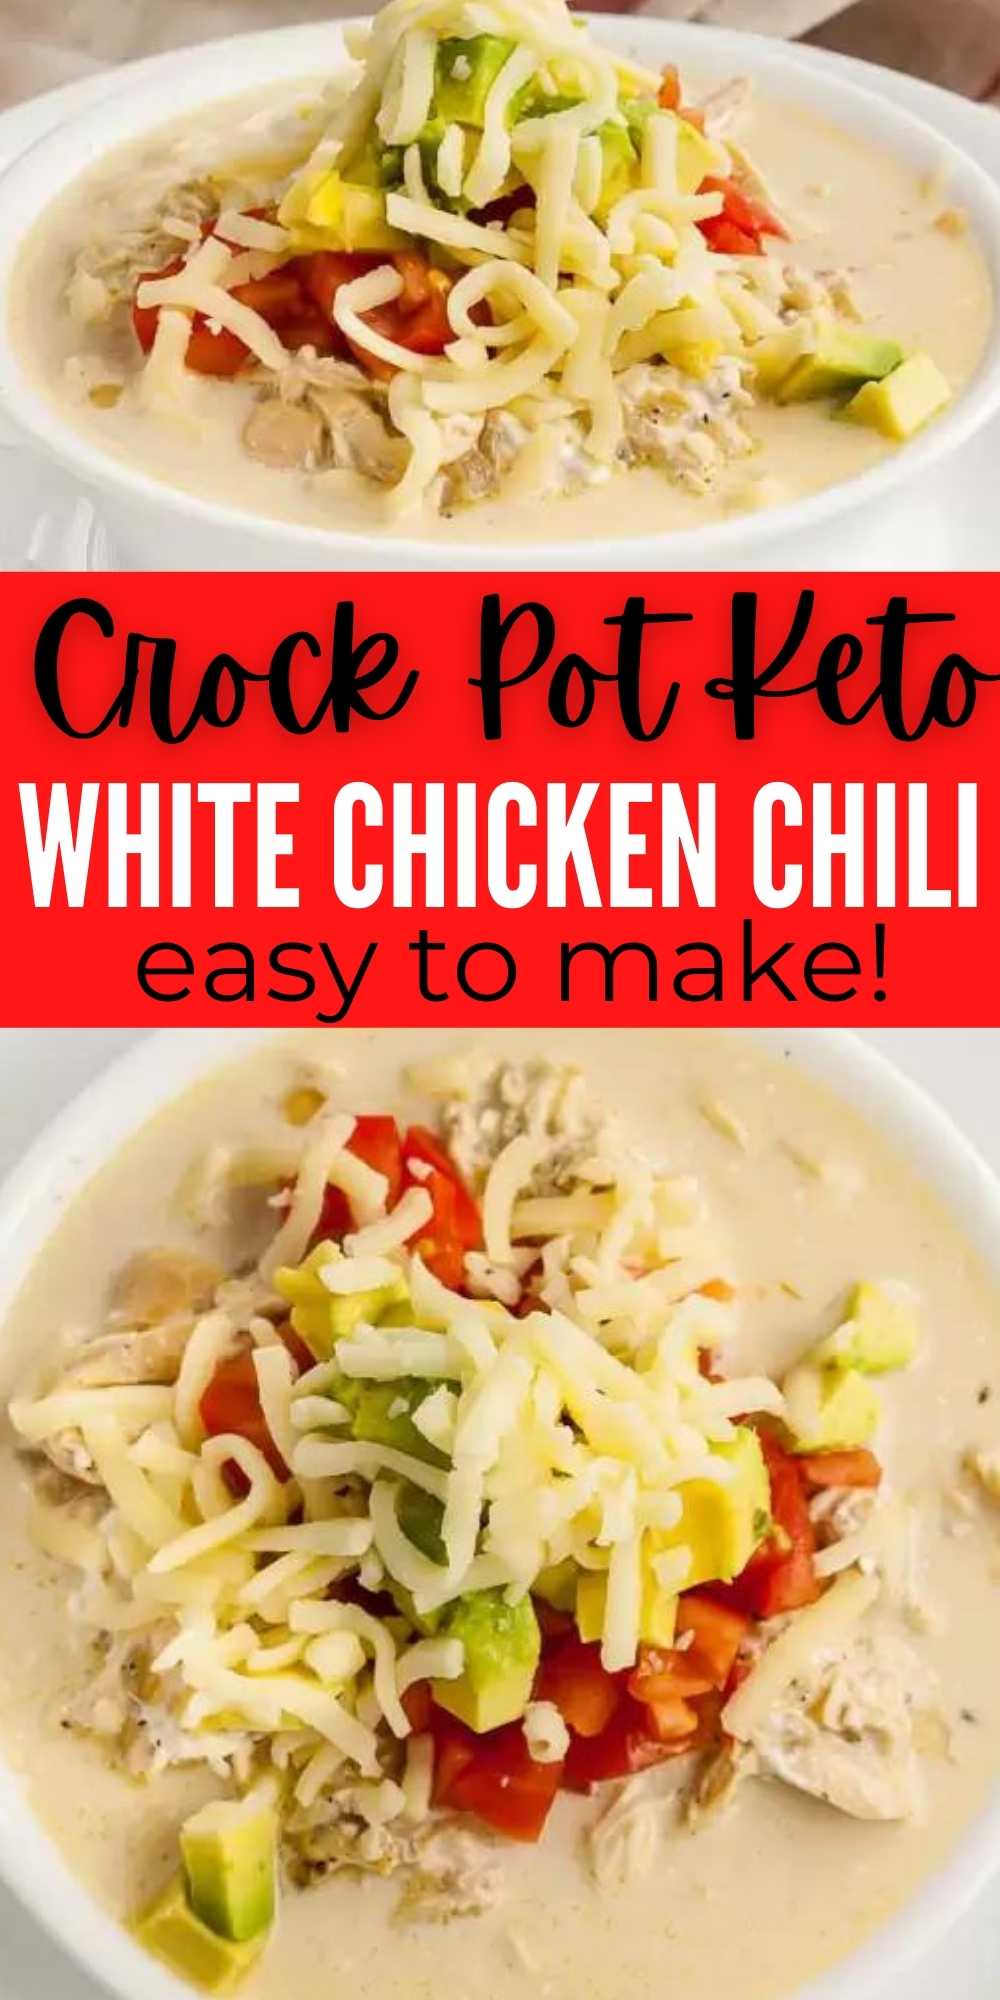 Crock pot Keto White Chicken Chili Recipe is low carb and delicious too. This chili is loaded with so much flavor, chicken, cheese and more.  Plus it’s easy to make in a slow cooker.  #eatingonadime #lowcarbrecipes #ketorecipes #crockpotrecipes #slowcookerrecipes 
